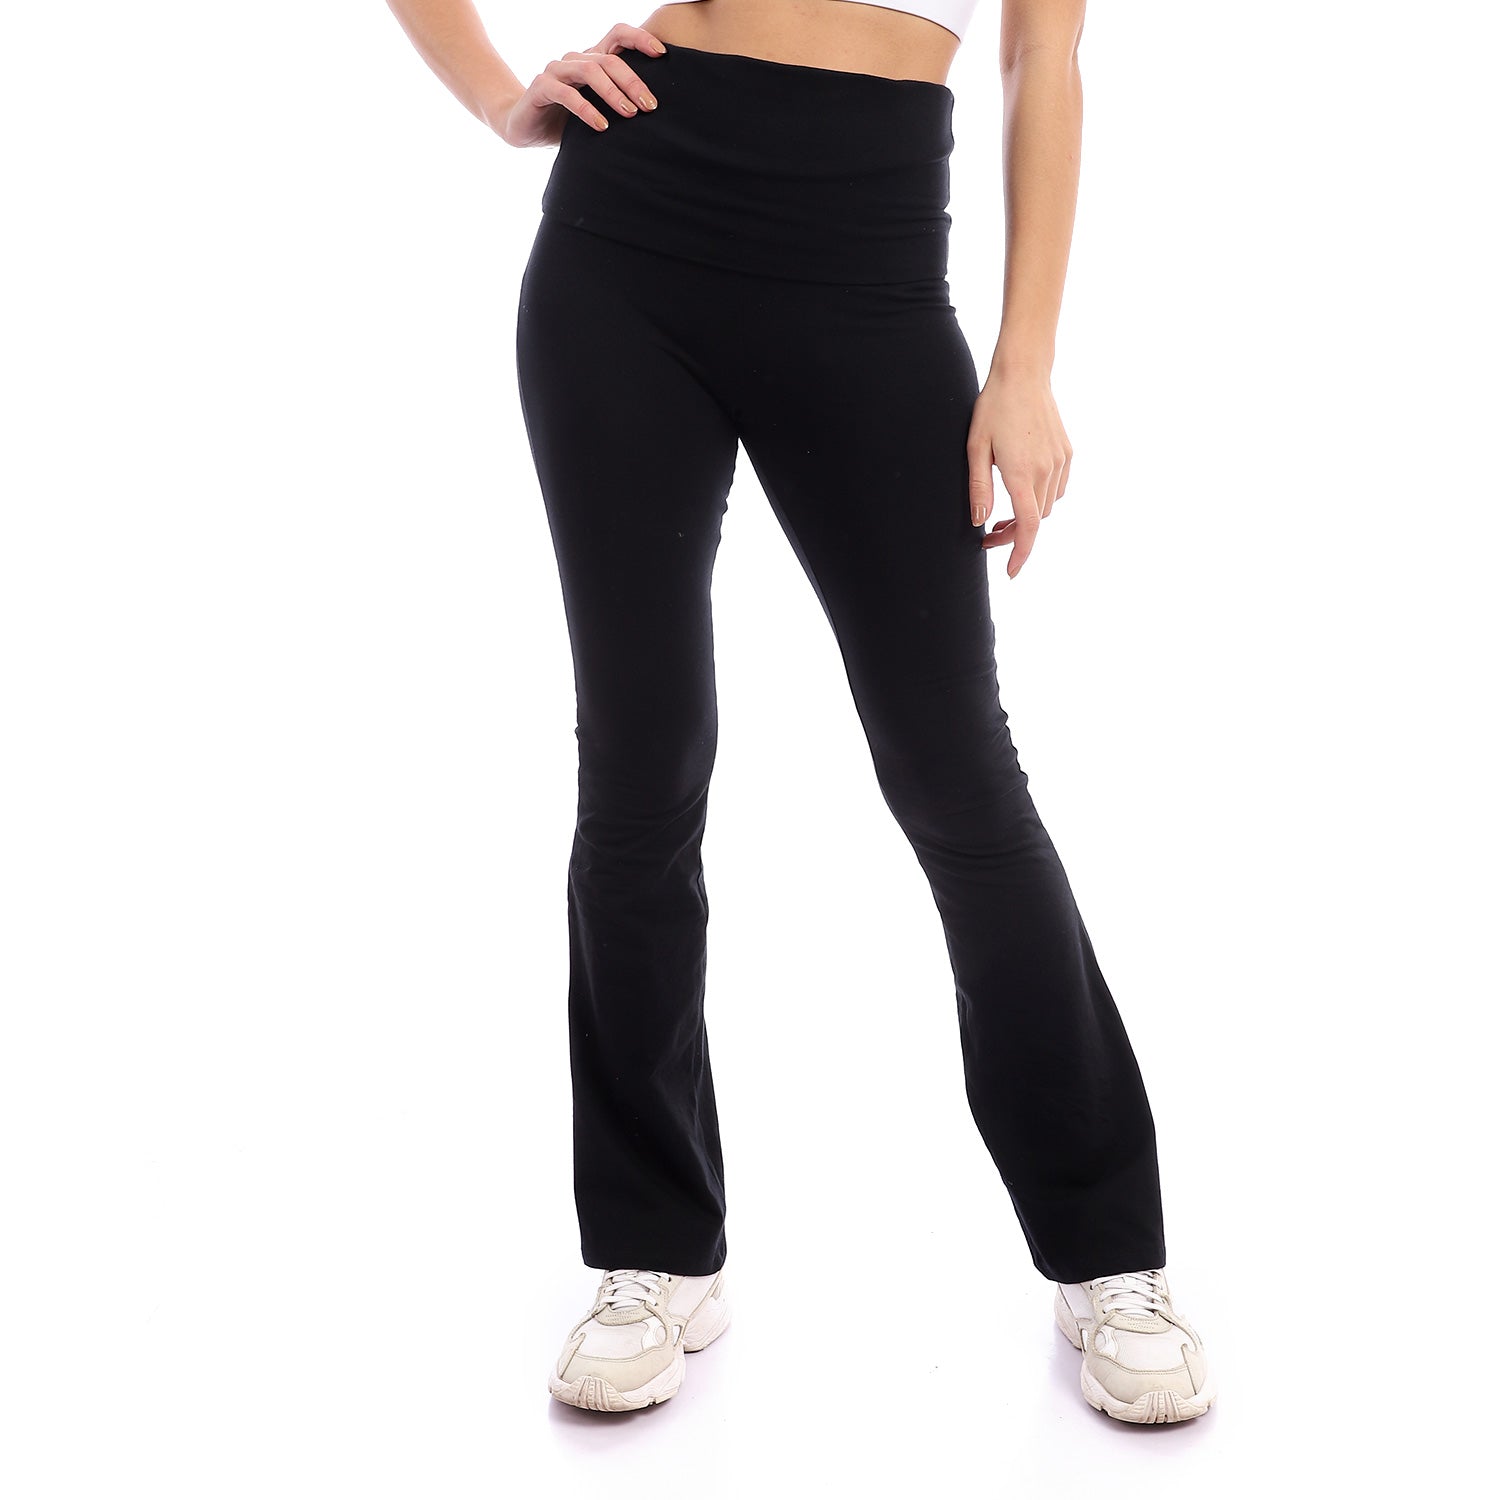 Buy HIGH WAIST LEGGINGS Fold Over Waist Yoga Pants Dance Wear Comfy Home  Wear Fold Over Tights Navy Online in India 